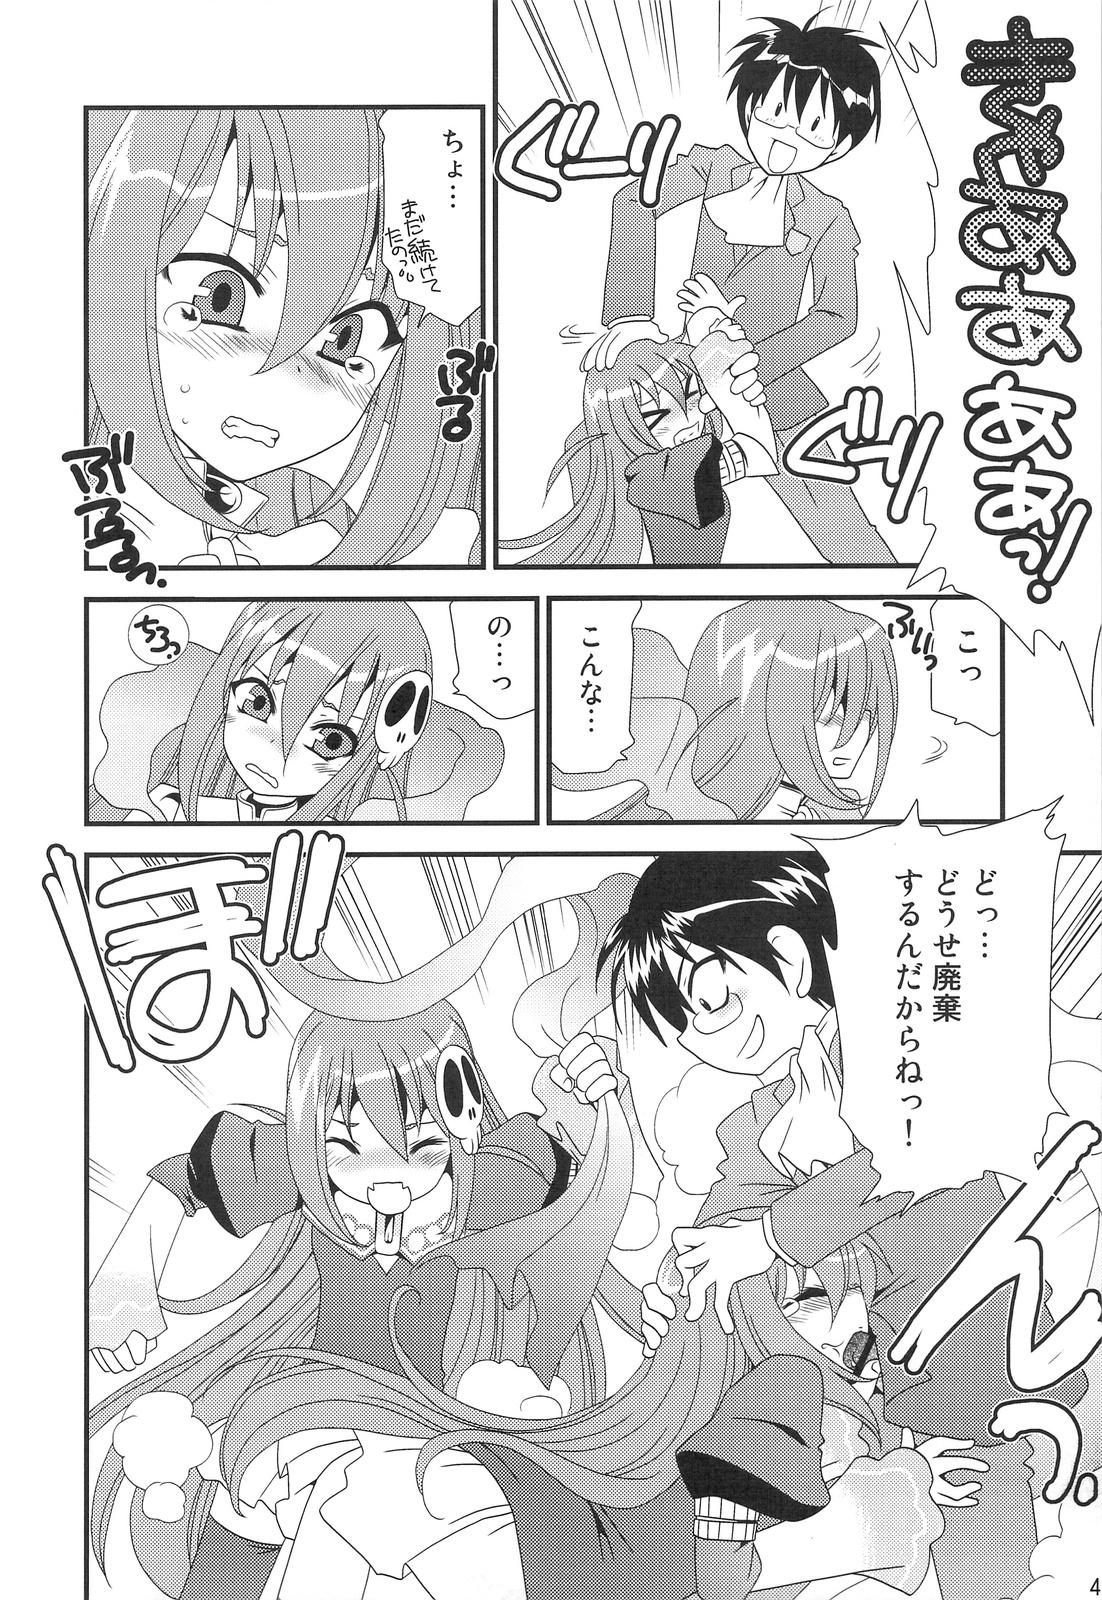 Fudendo Kami Shiru - The world god only knows Friends - Page 3